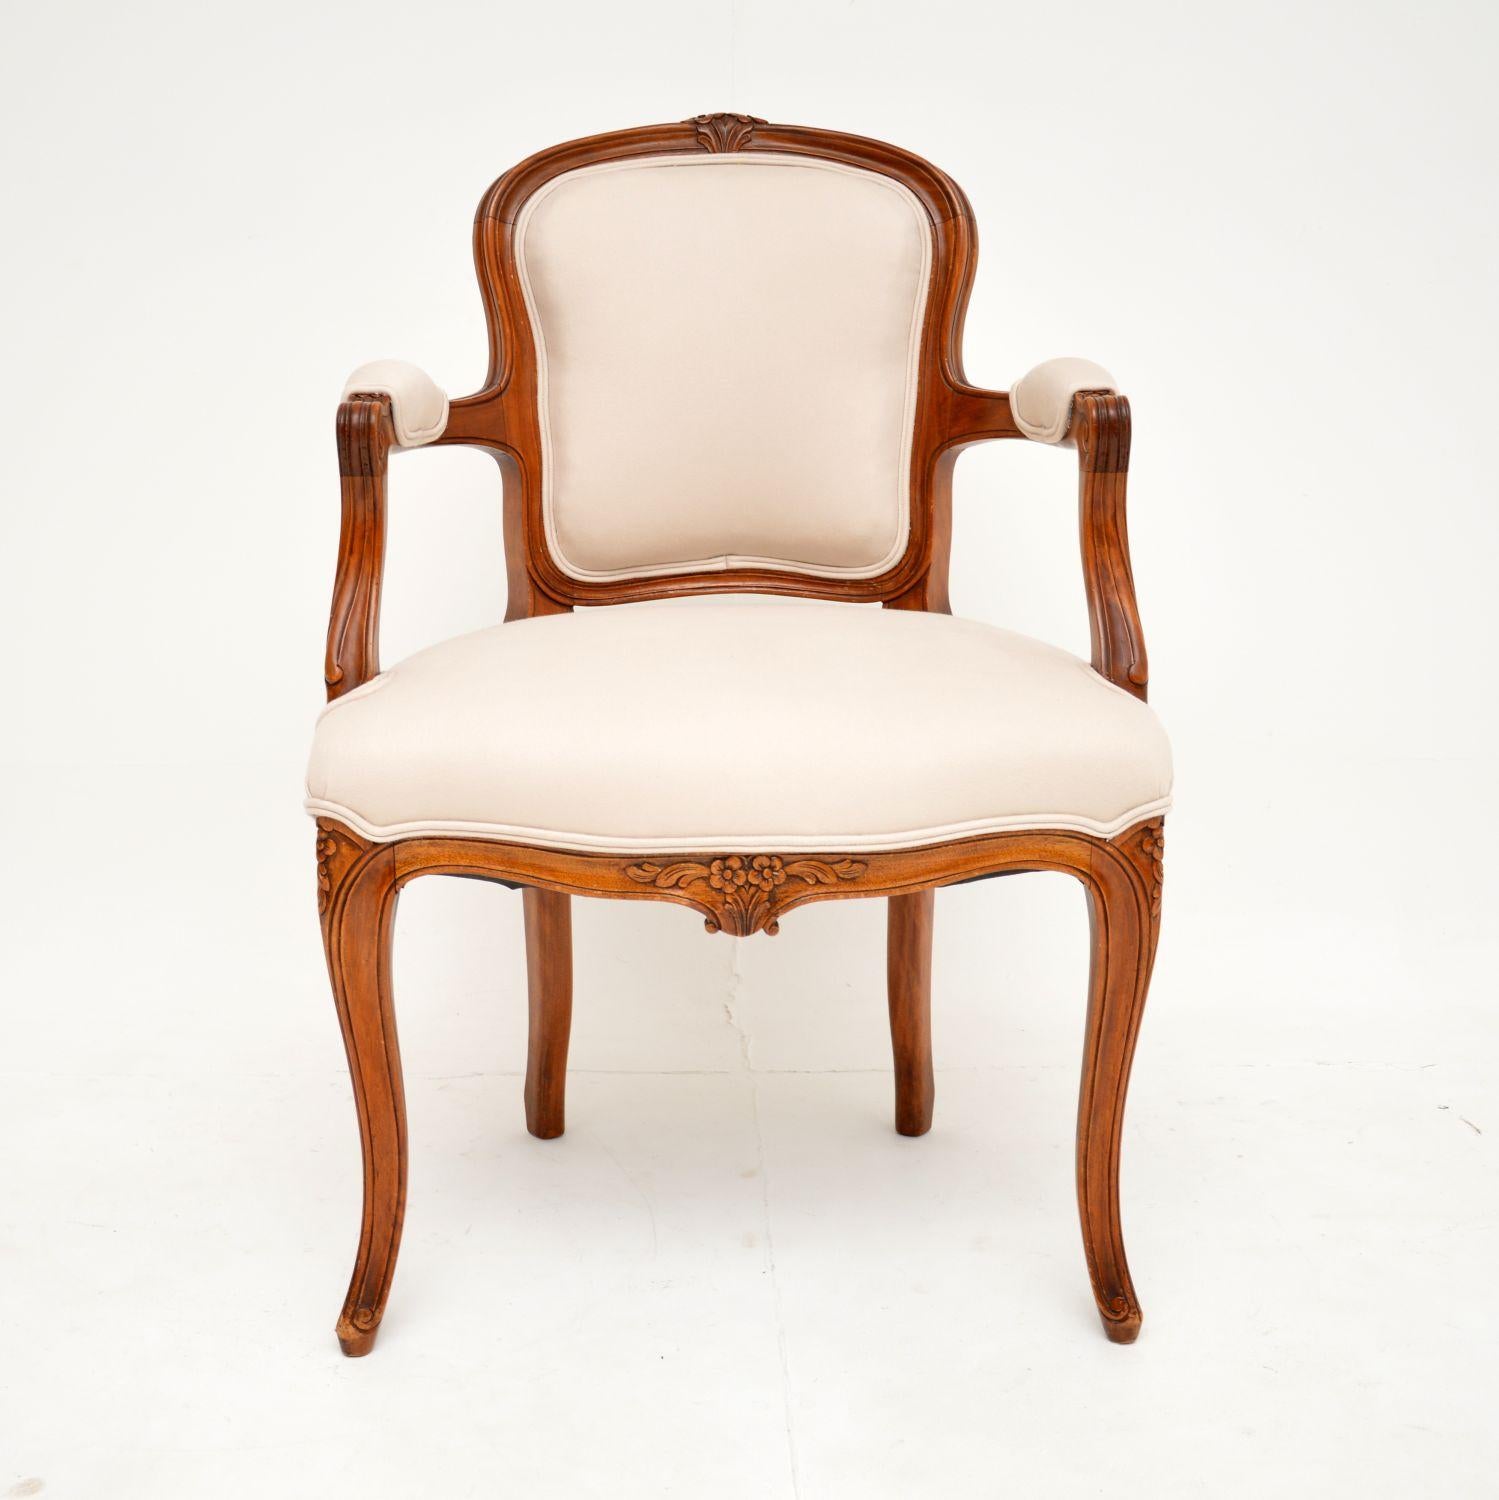 A beautiful and very well made antique French salon chair. This was made in France, it dates from around the 1930’s.

It’s of lovely quality, with a beautiful and elegant design. There is crisp carving throughout, this is a useful size and is very